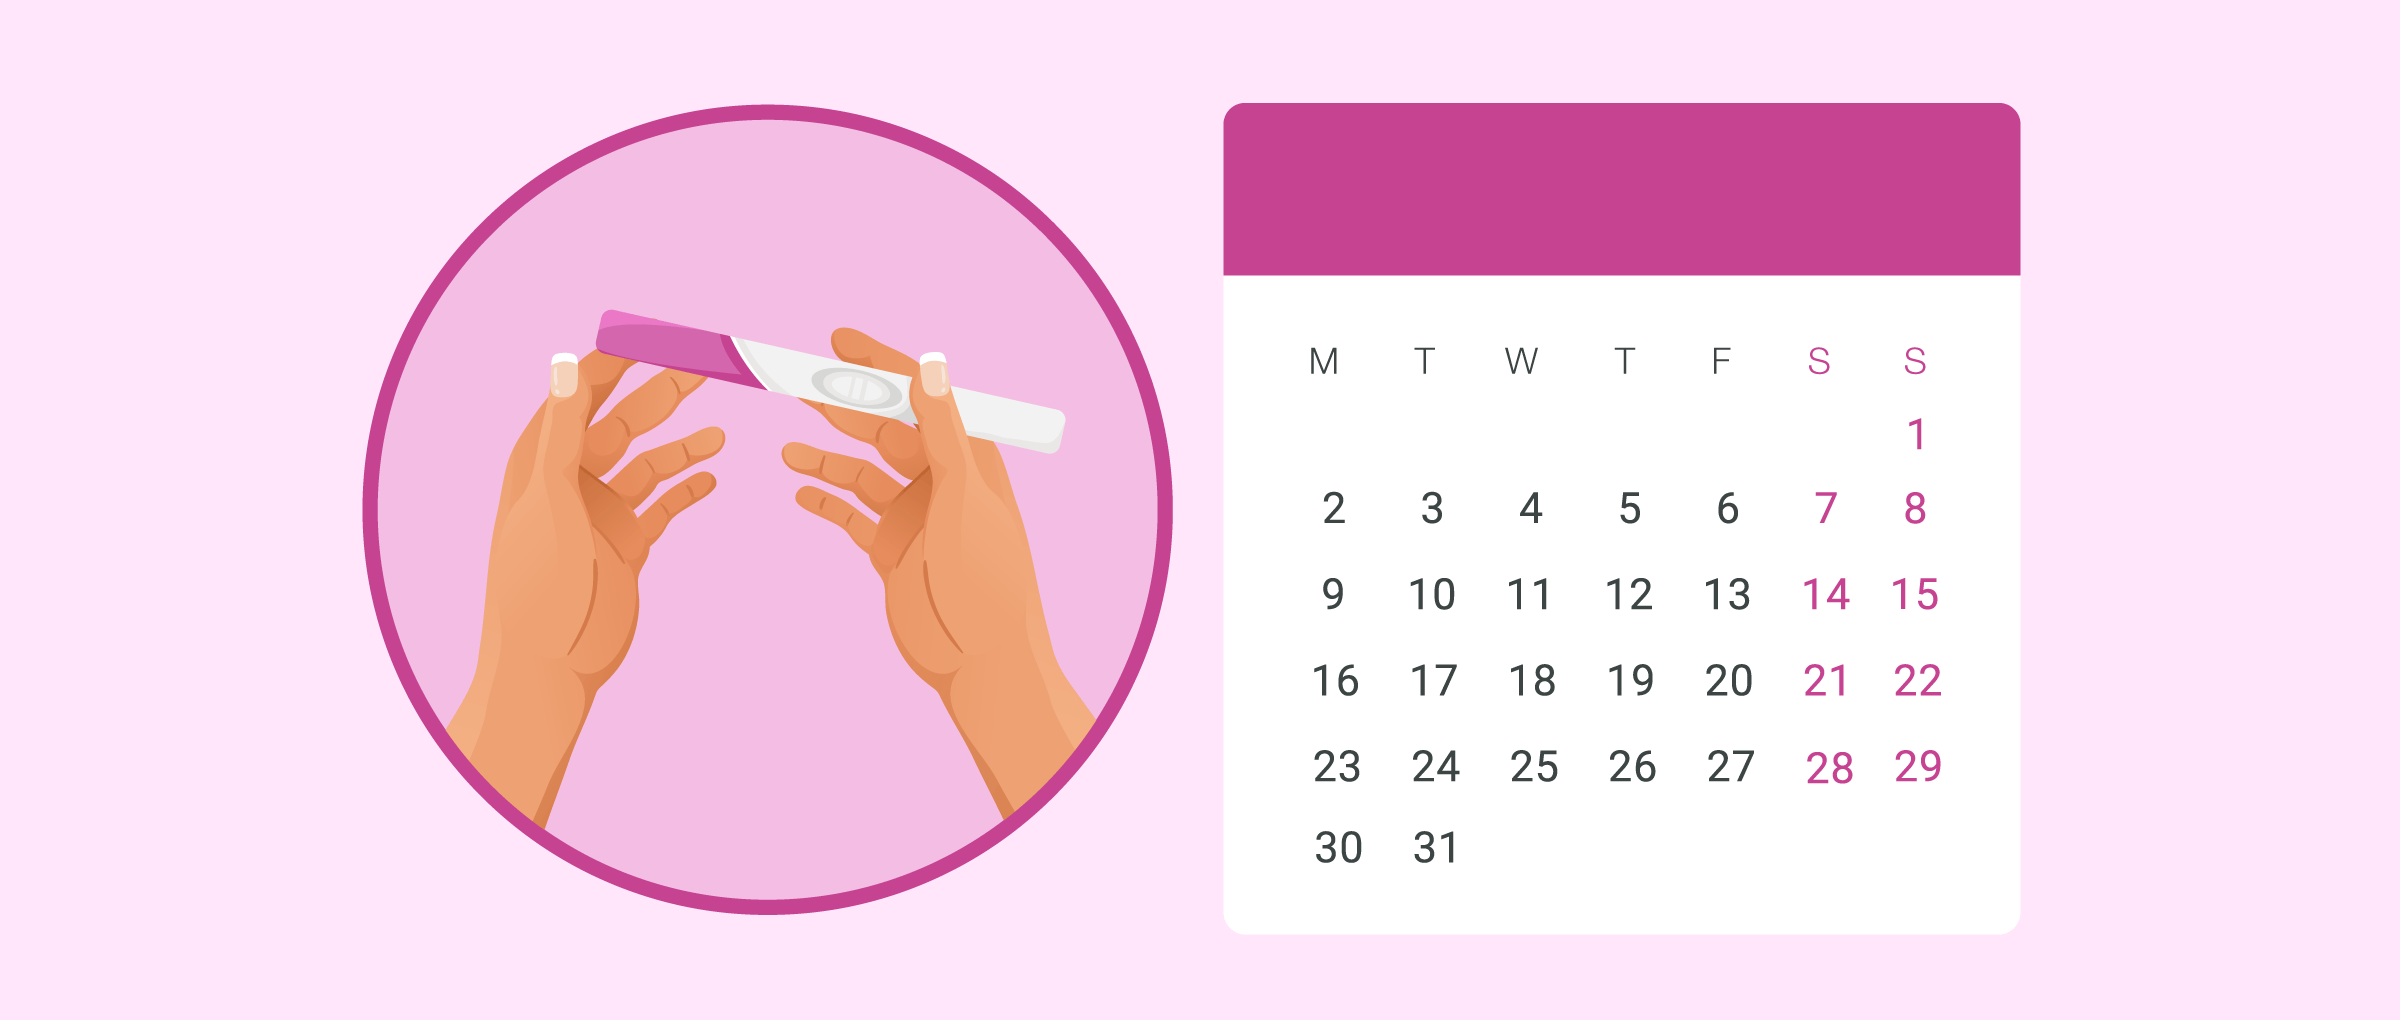 When to do the pregnancy test